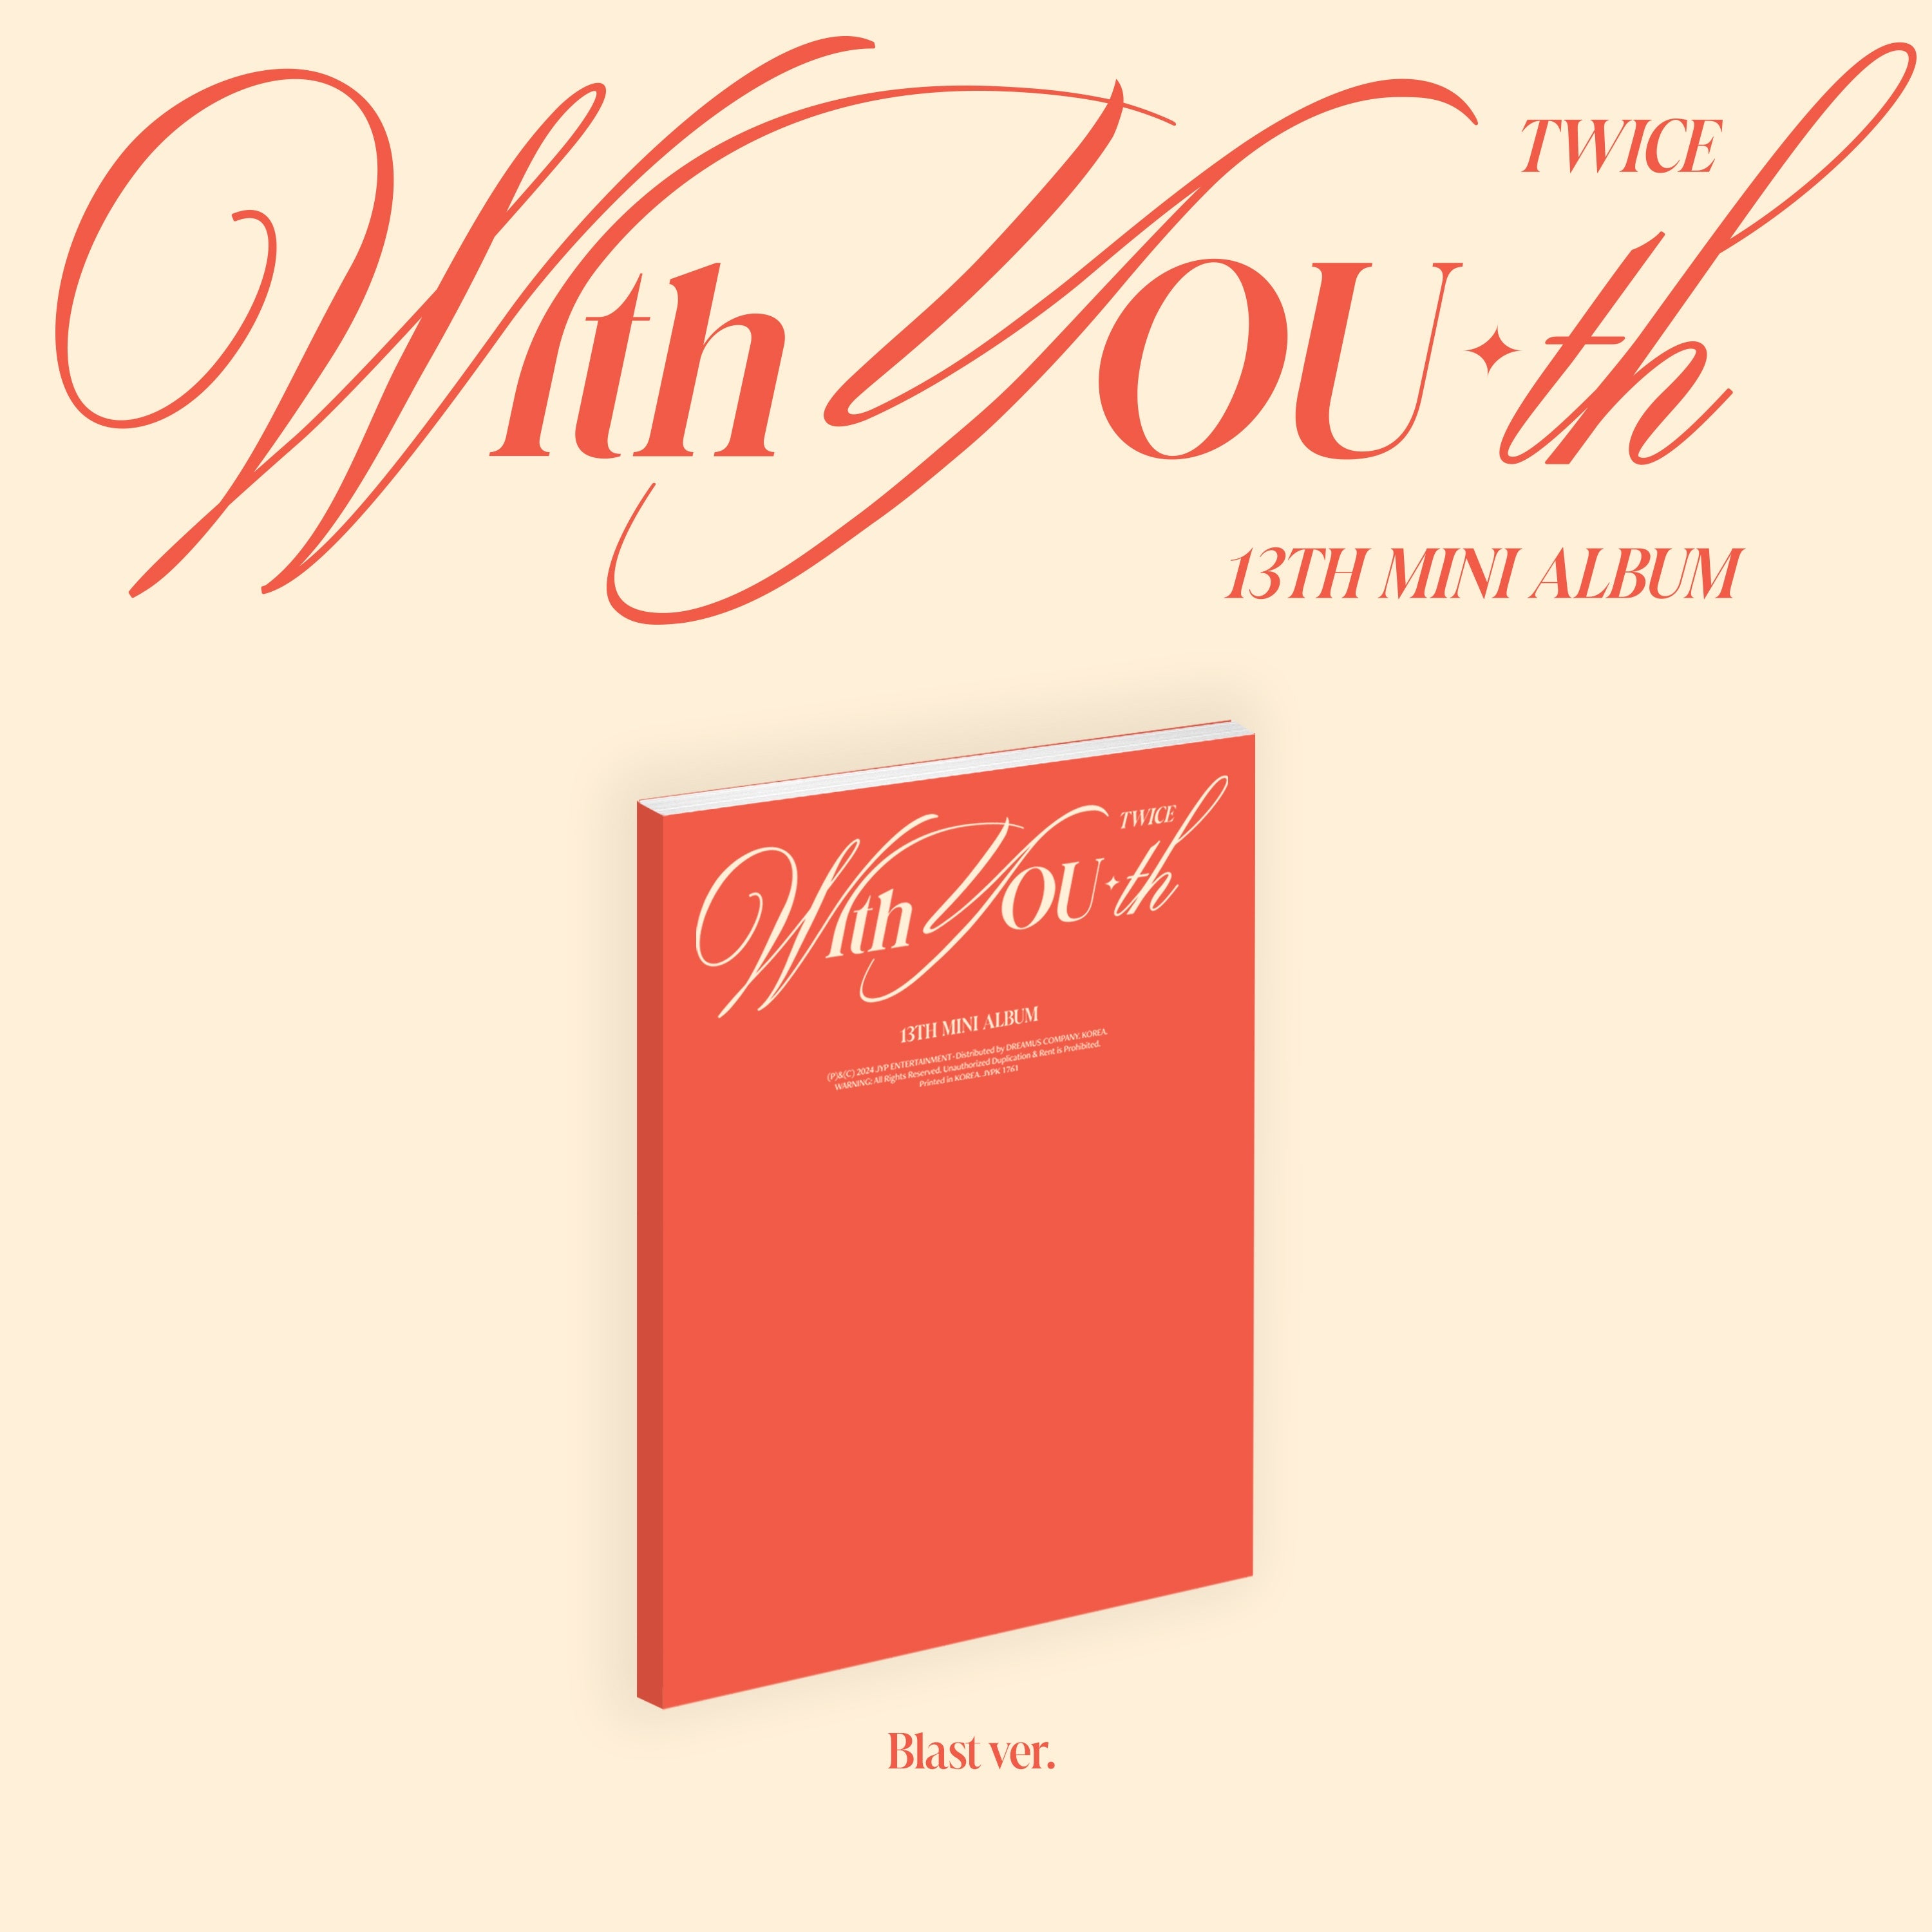 Twice- With YOU-th [Blast Version]